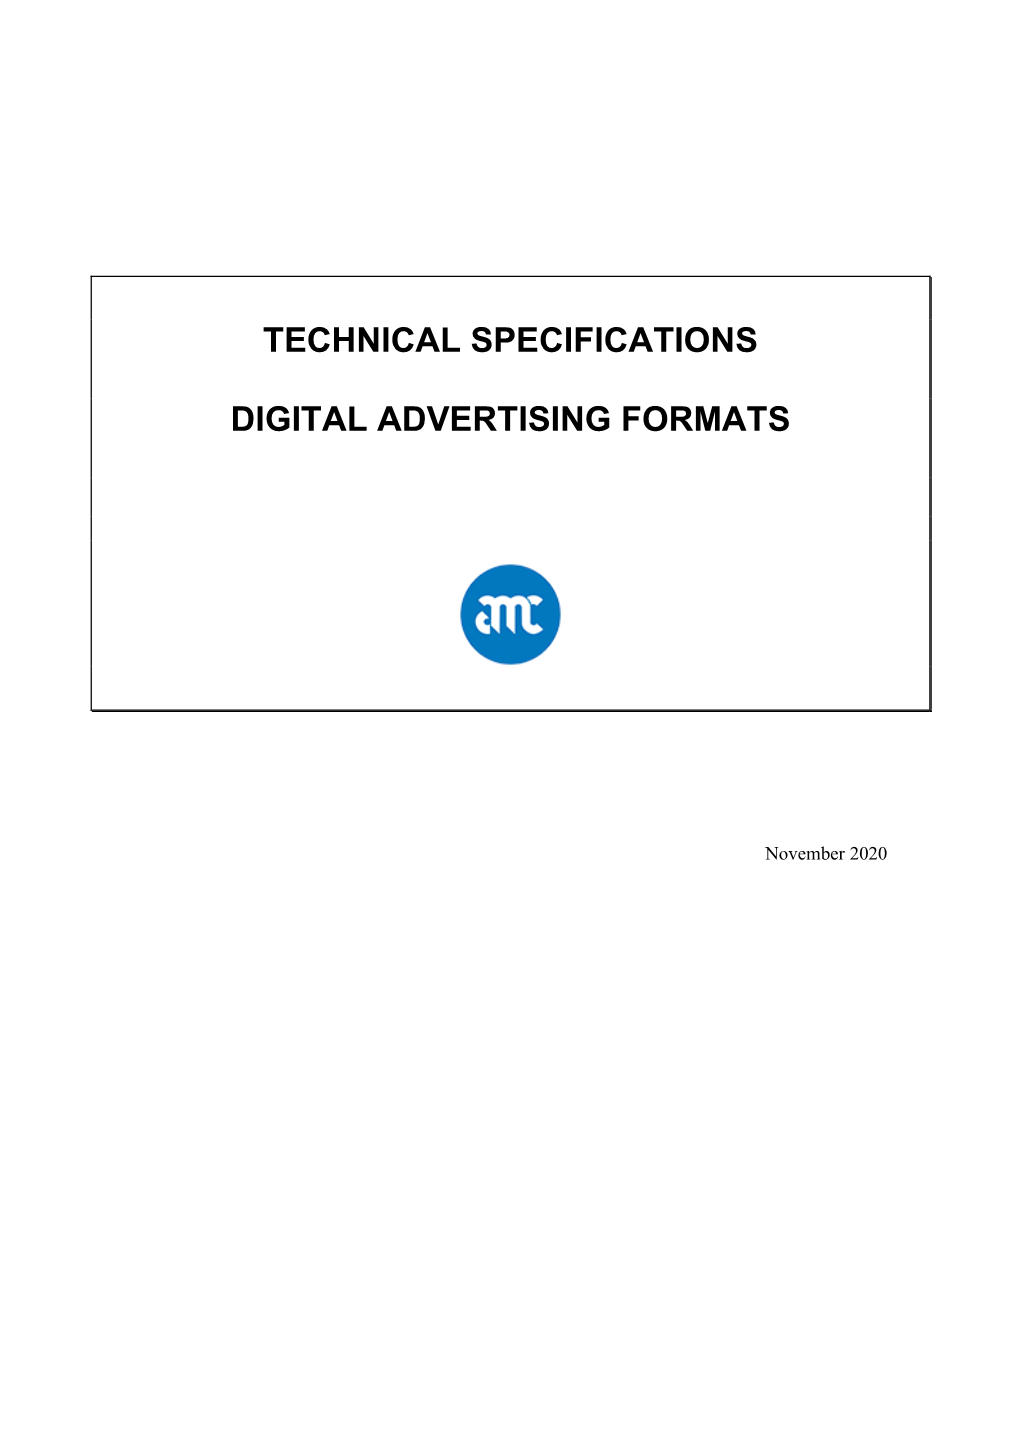 Digital Technical Specifications